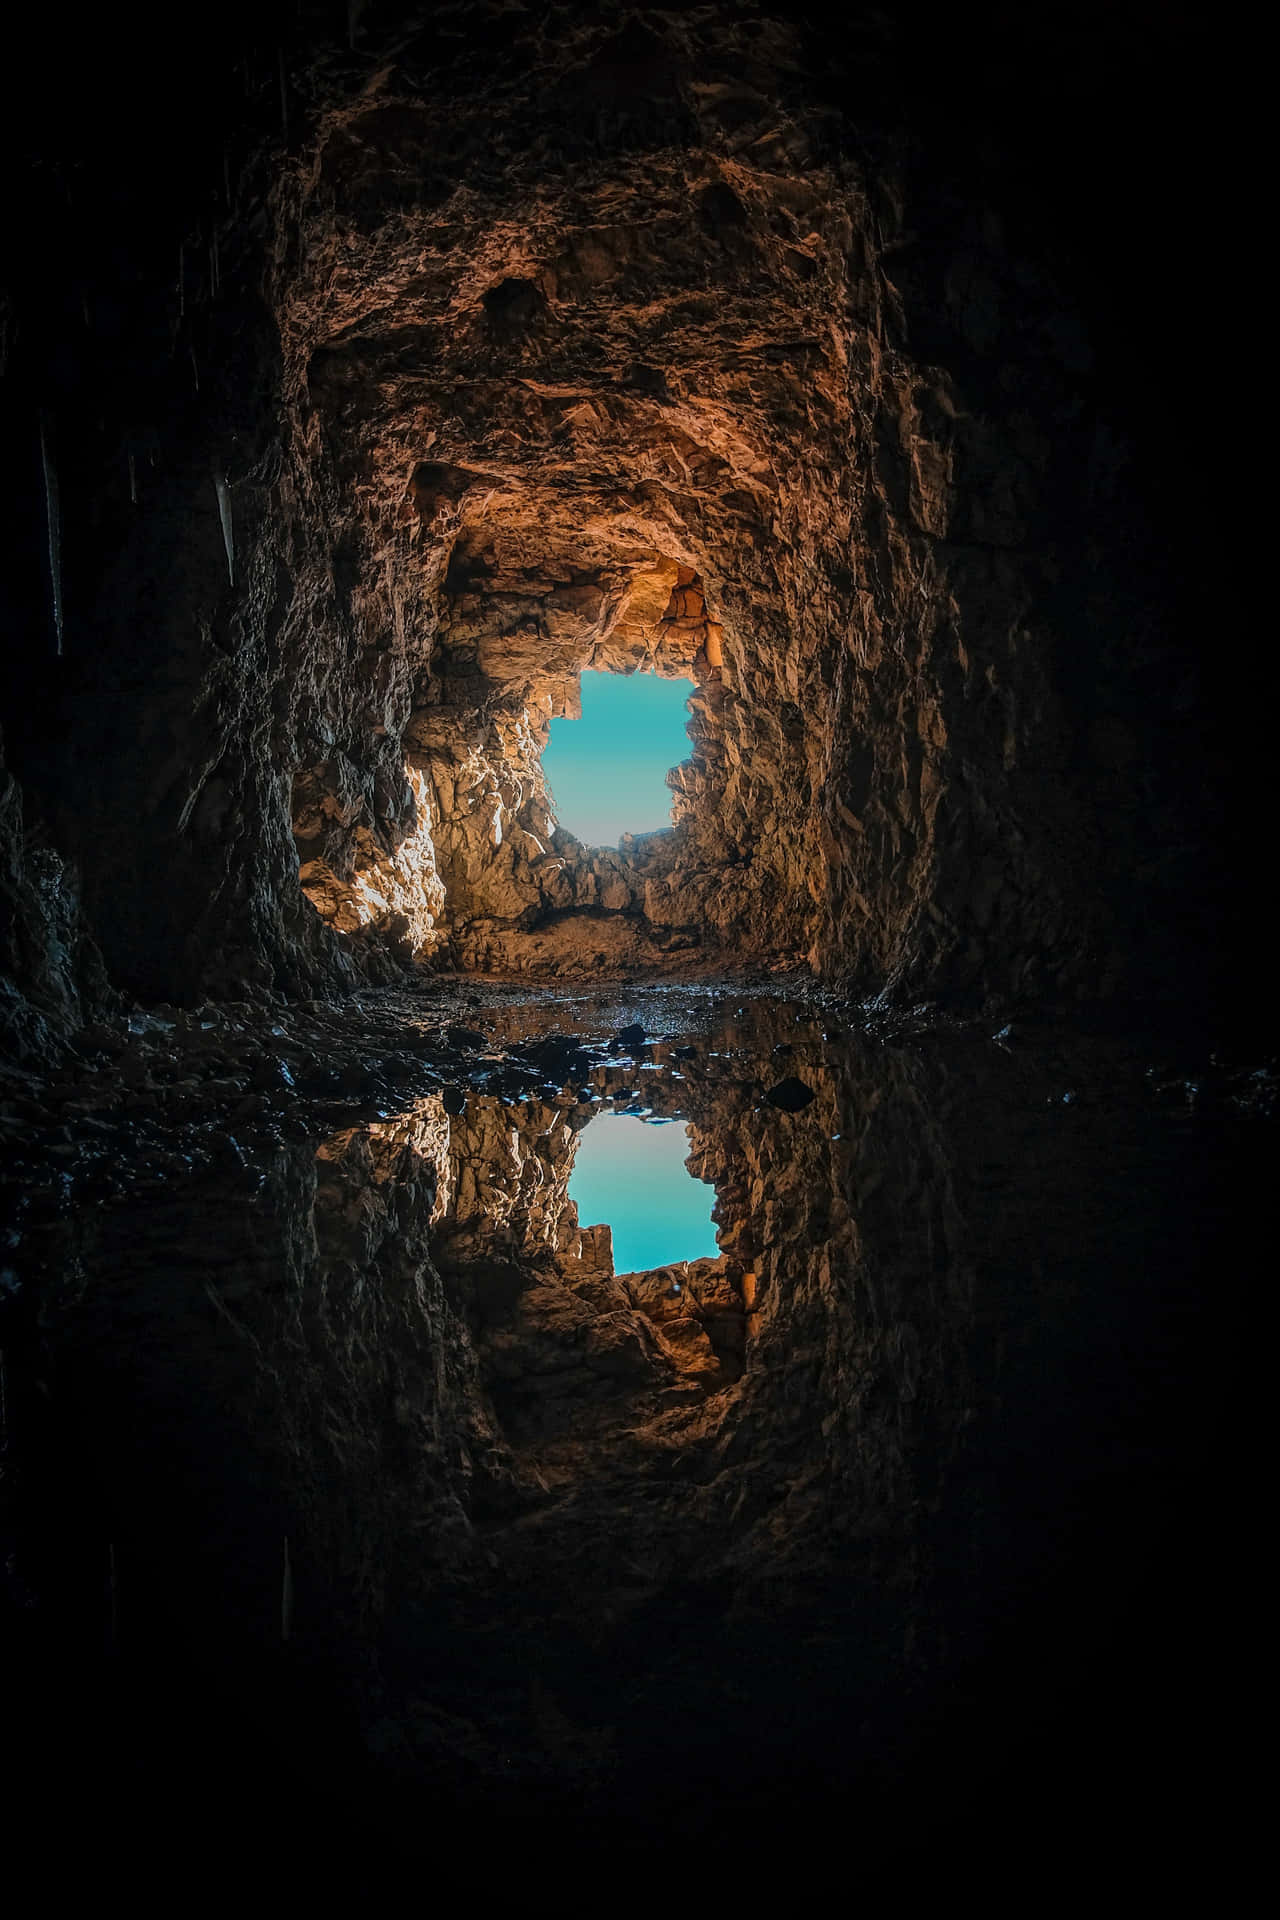 The magic of caves